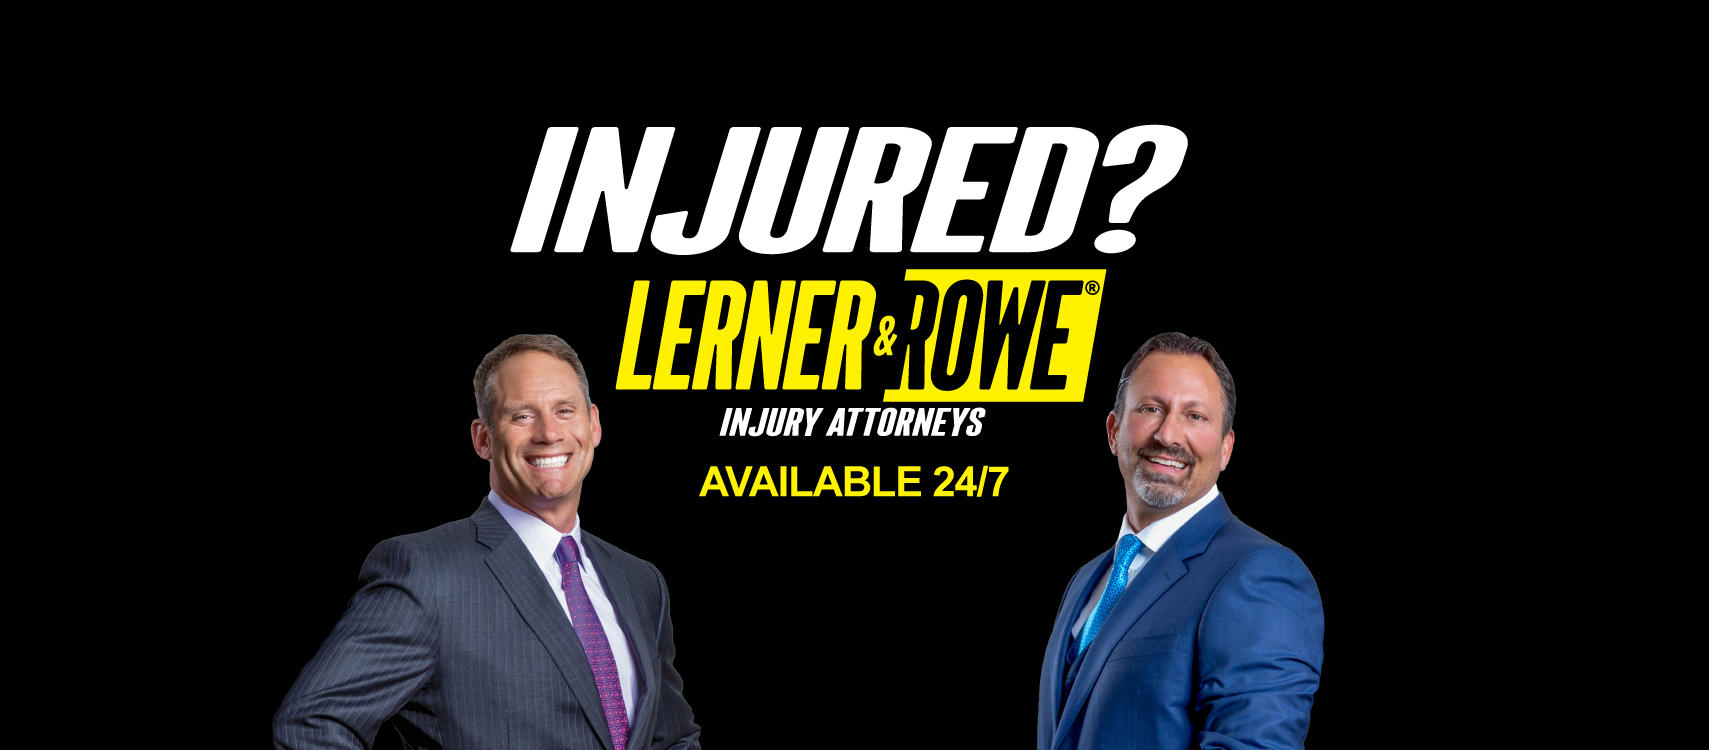 Lerner and Rowe Injury Attorneys Lerner and Rowe Injury Attorneys Tucson Tucson (520)977-1900